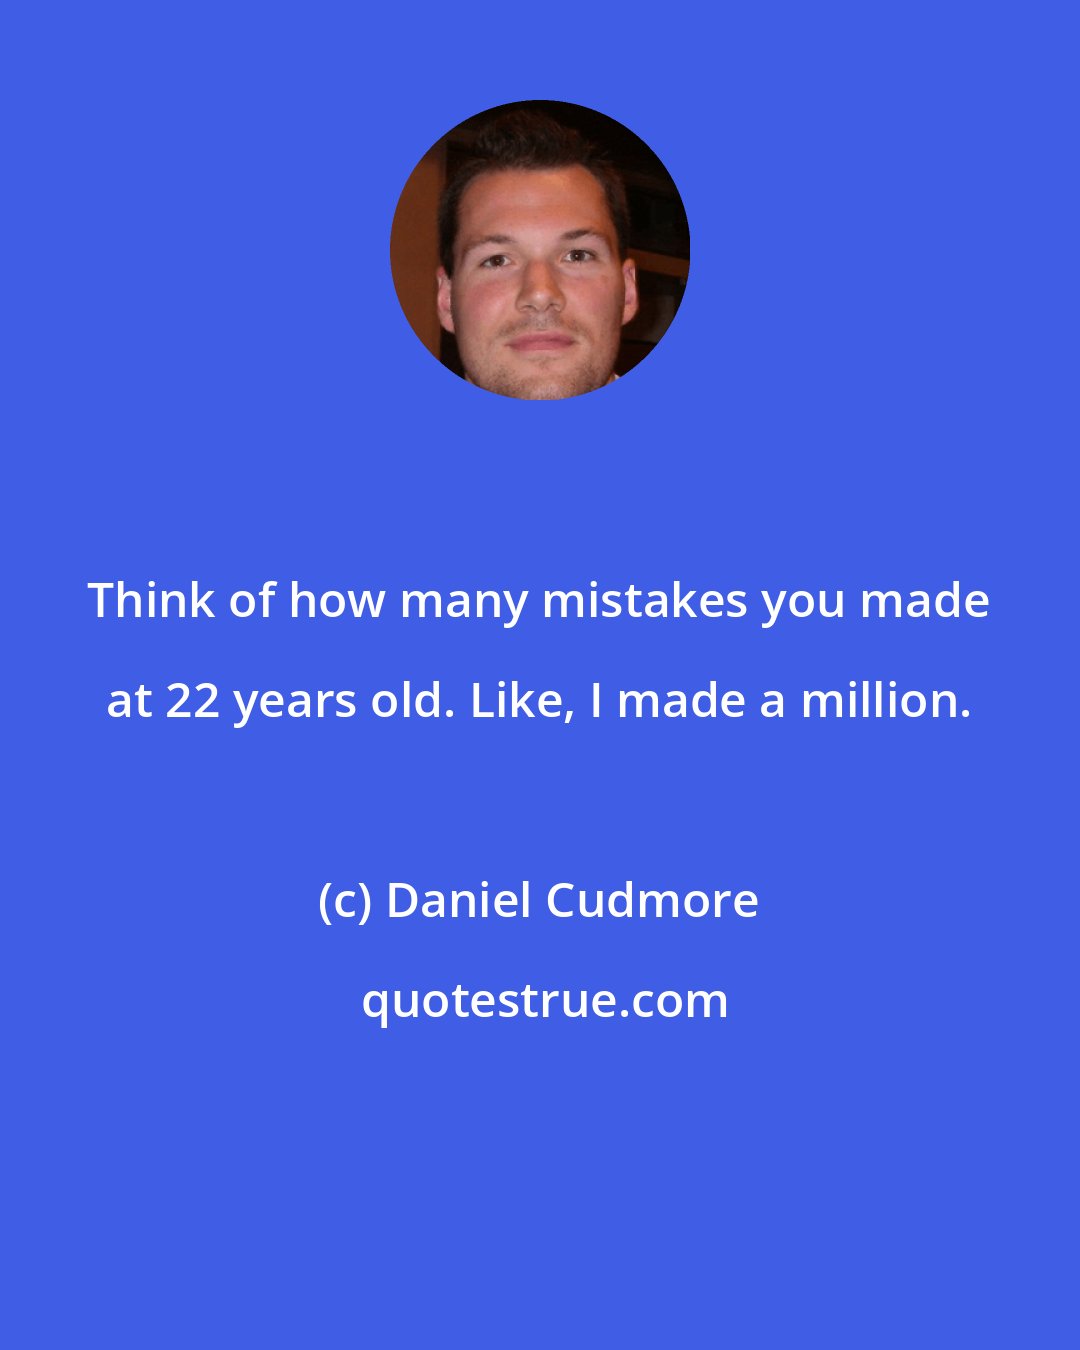 Daniel Cudmore: Think of how many mistakes you made at 22 years old. Like, I made a million.